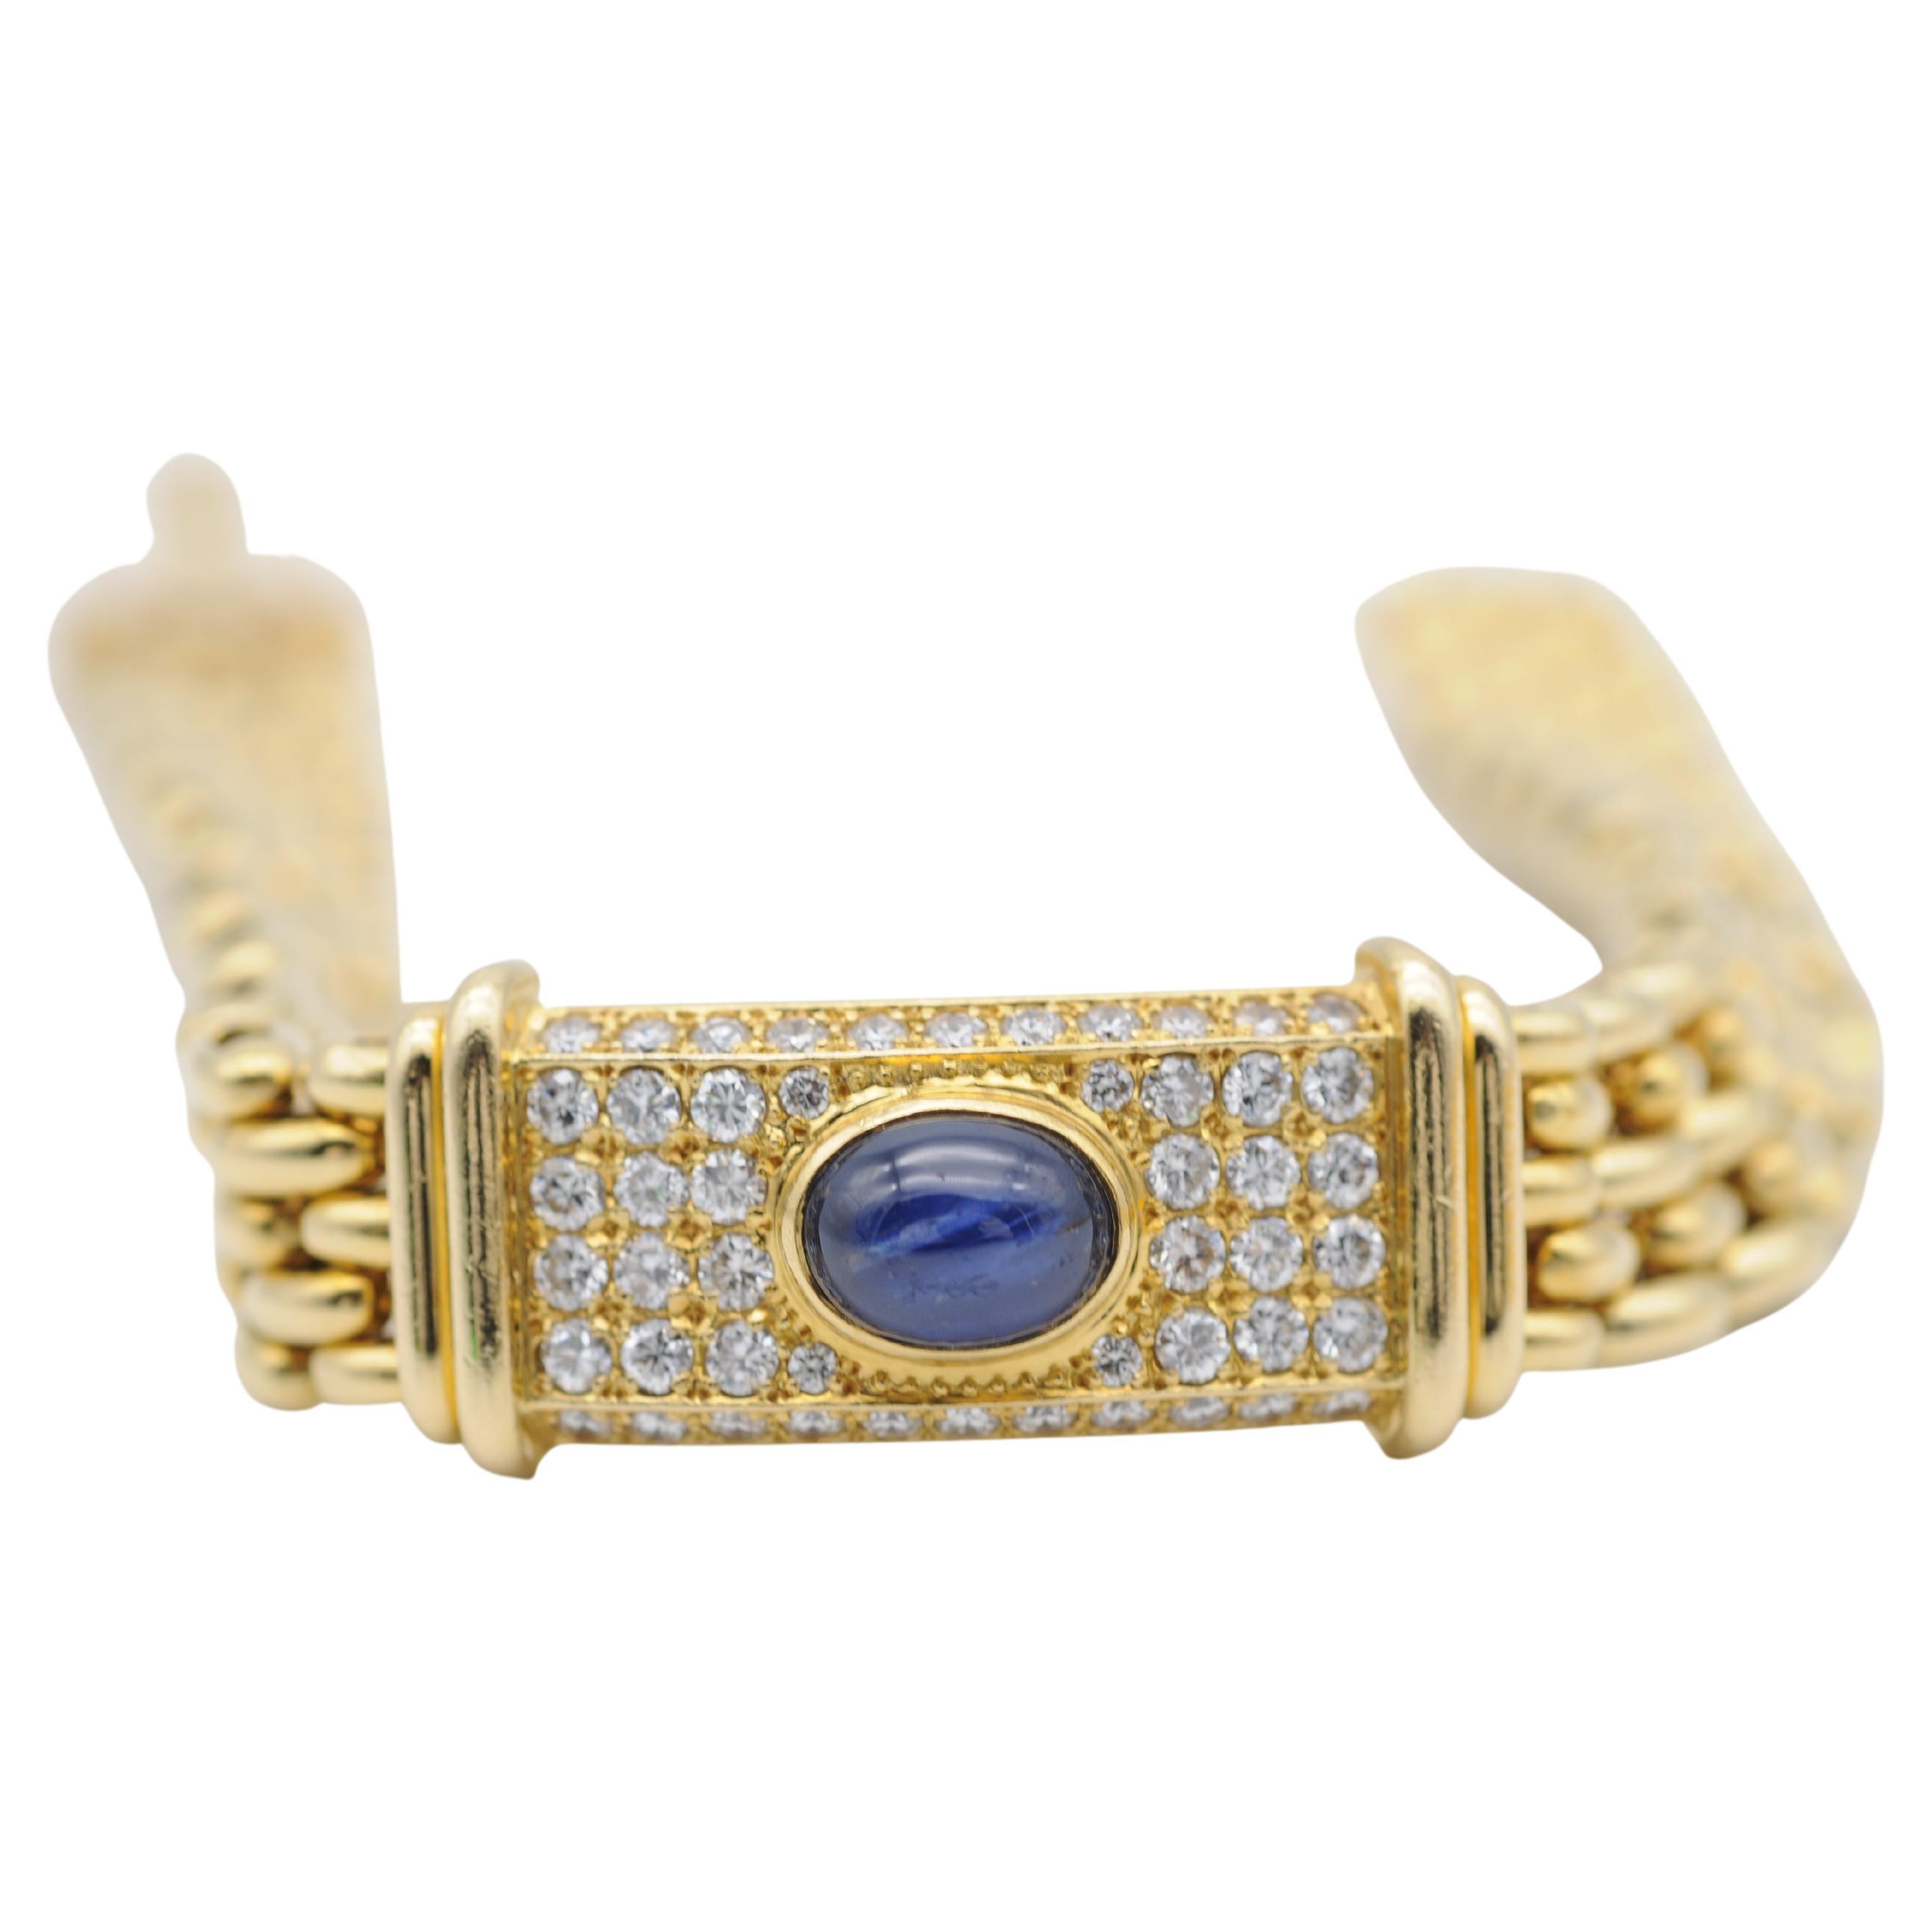 Introducing the stunning Royal 18k Yellow Gold Bracelet with Sapphire and Diamonds - a masterpiece of elegance, luxury, and sophistication. Crafted with the finest attention to detail, this bracelet boasts a wide link design that is sure to catch